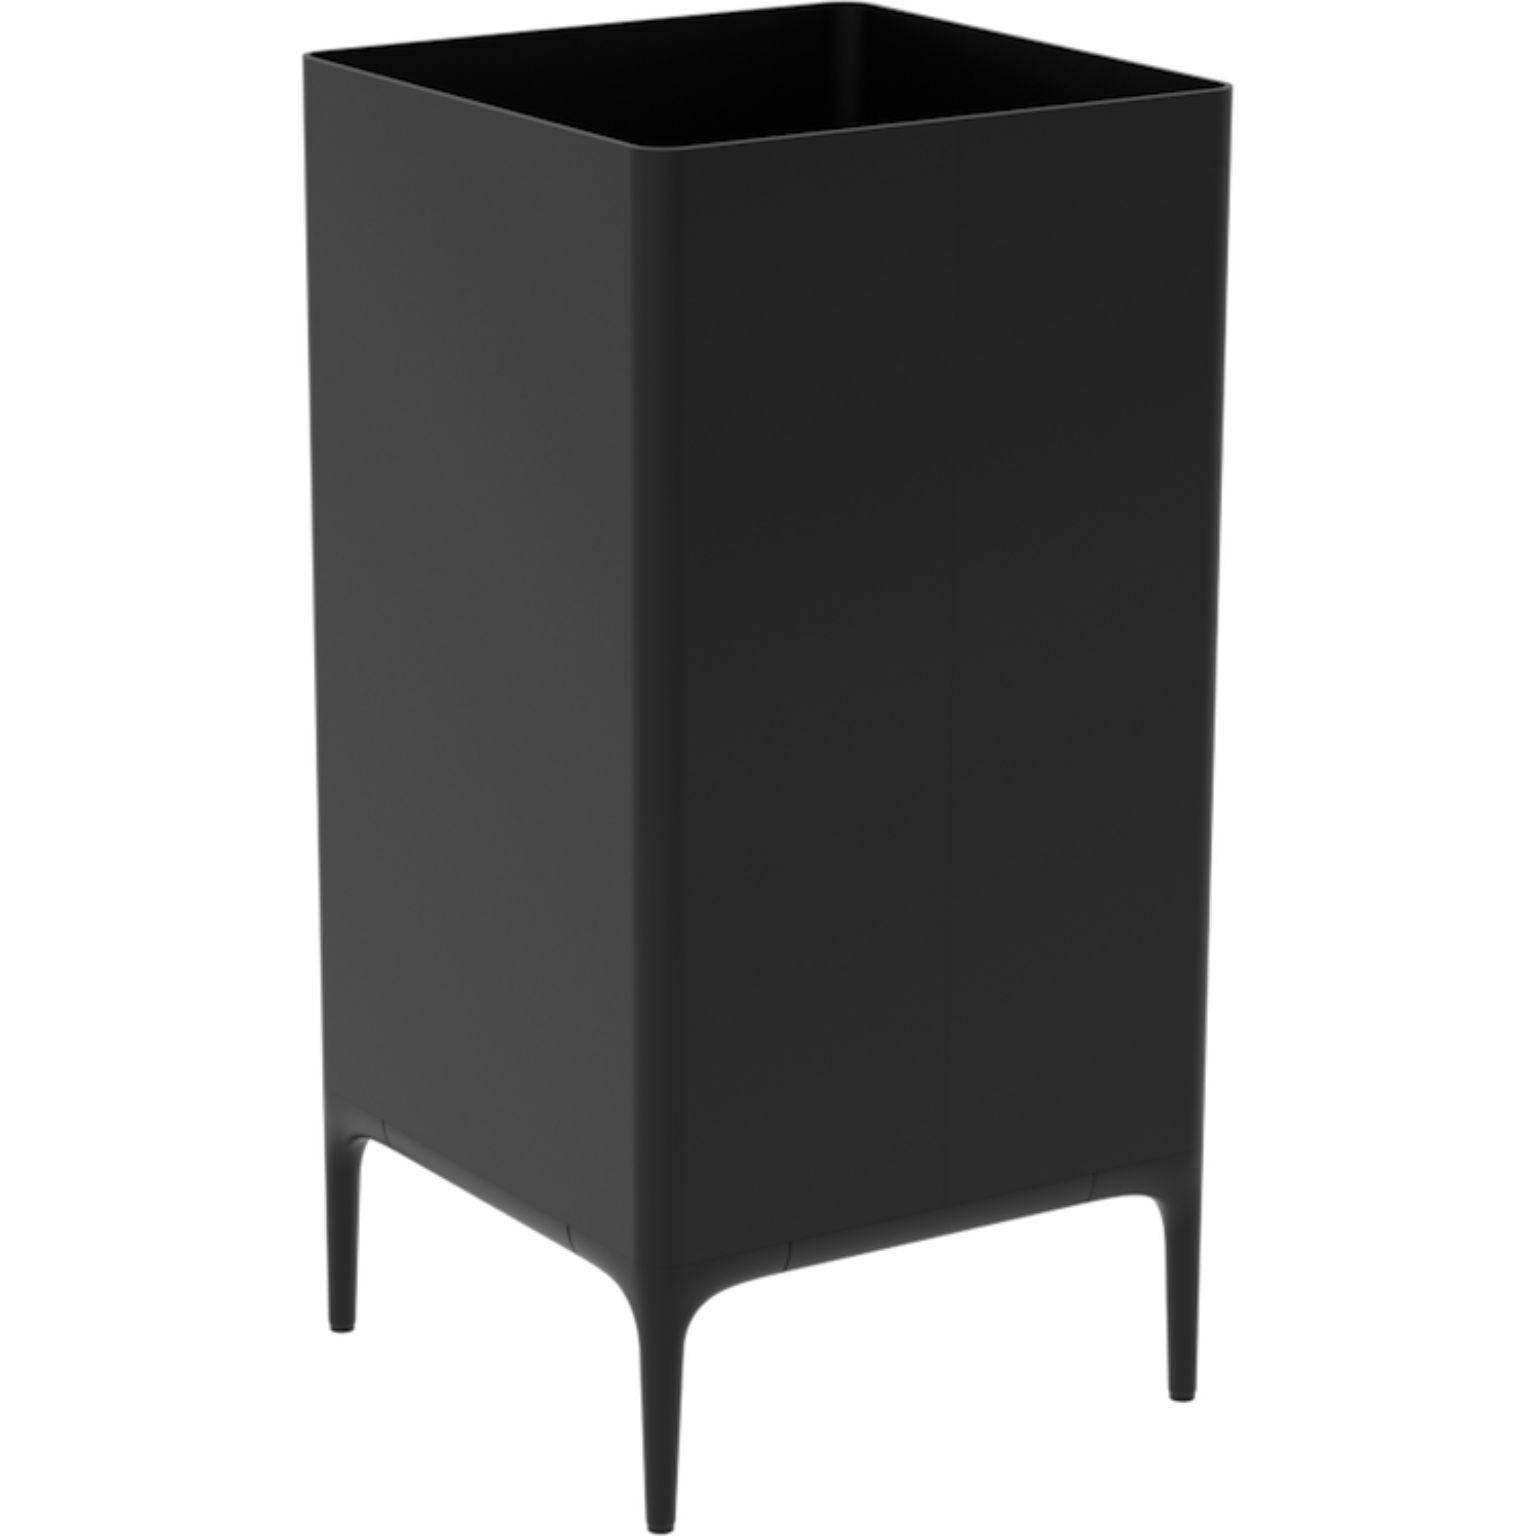 Xaloc black 95 pot by MOWEE
Dimensions: D45 x W45 x H90 cm
Material: aluminium
Weight: 12 kg
Also available in different colours and finishes. 

 Xaloc synthesizes the lines of interior furniture to extrapolate to the exterior, creating an